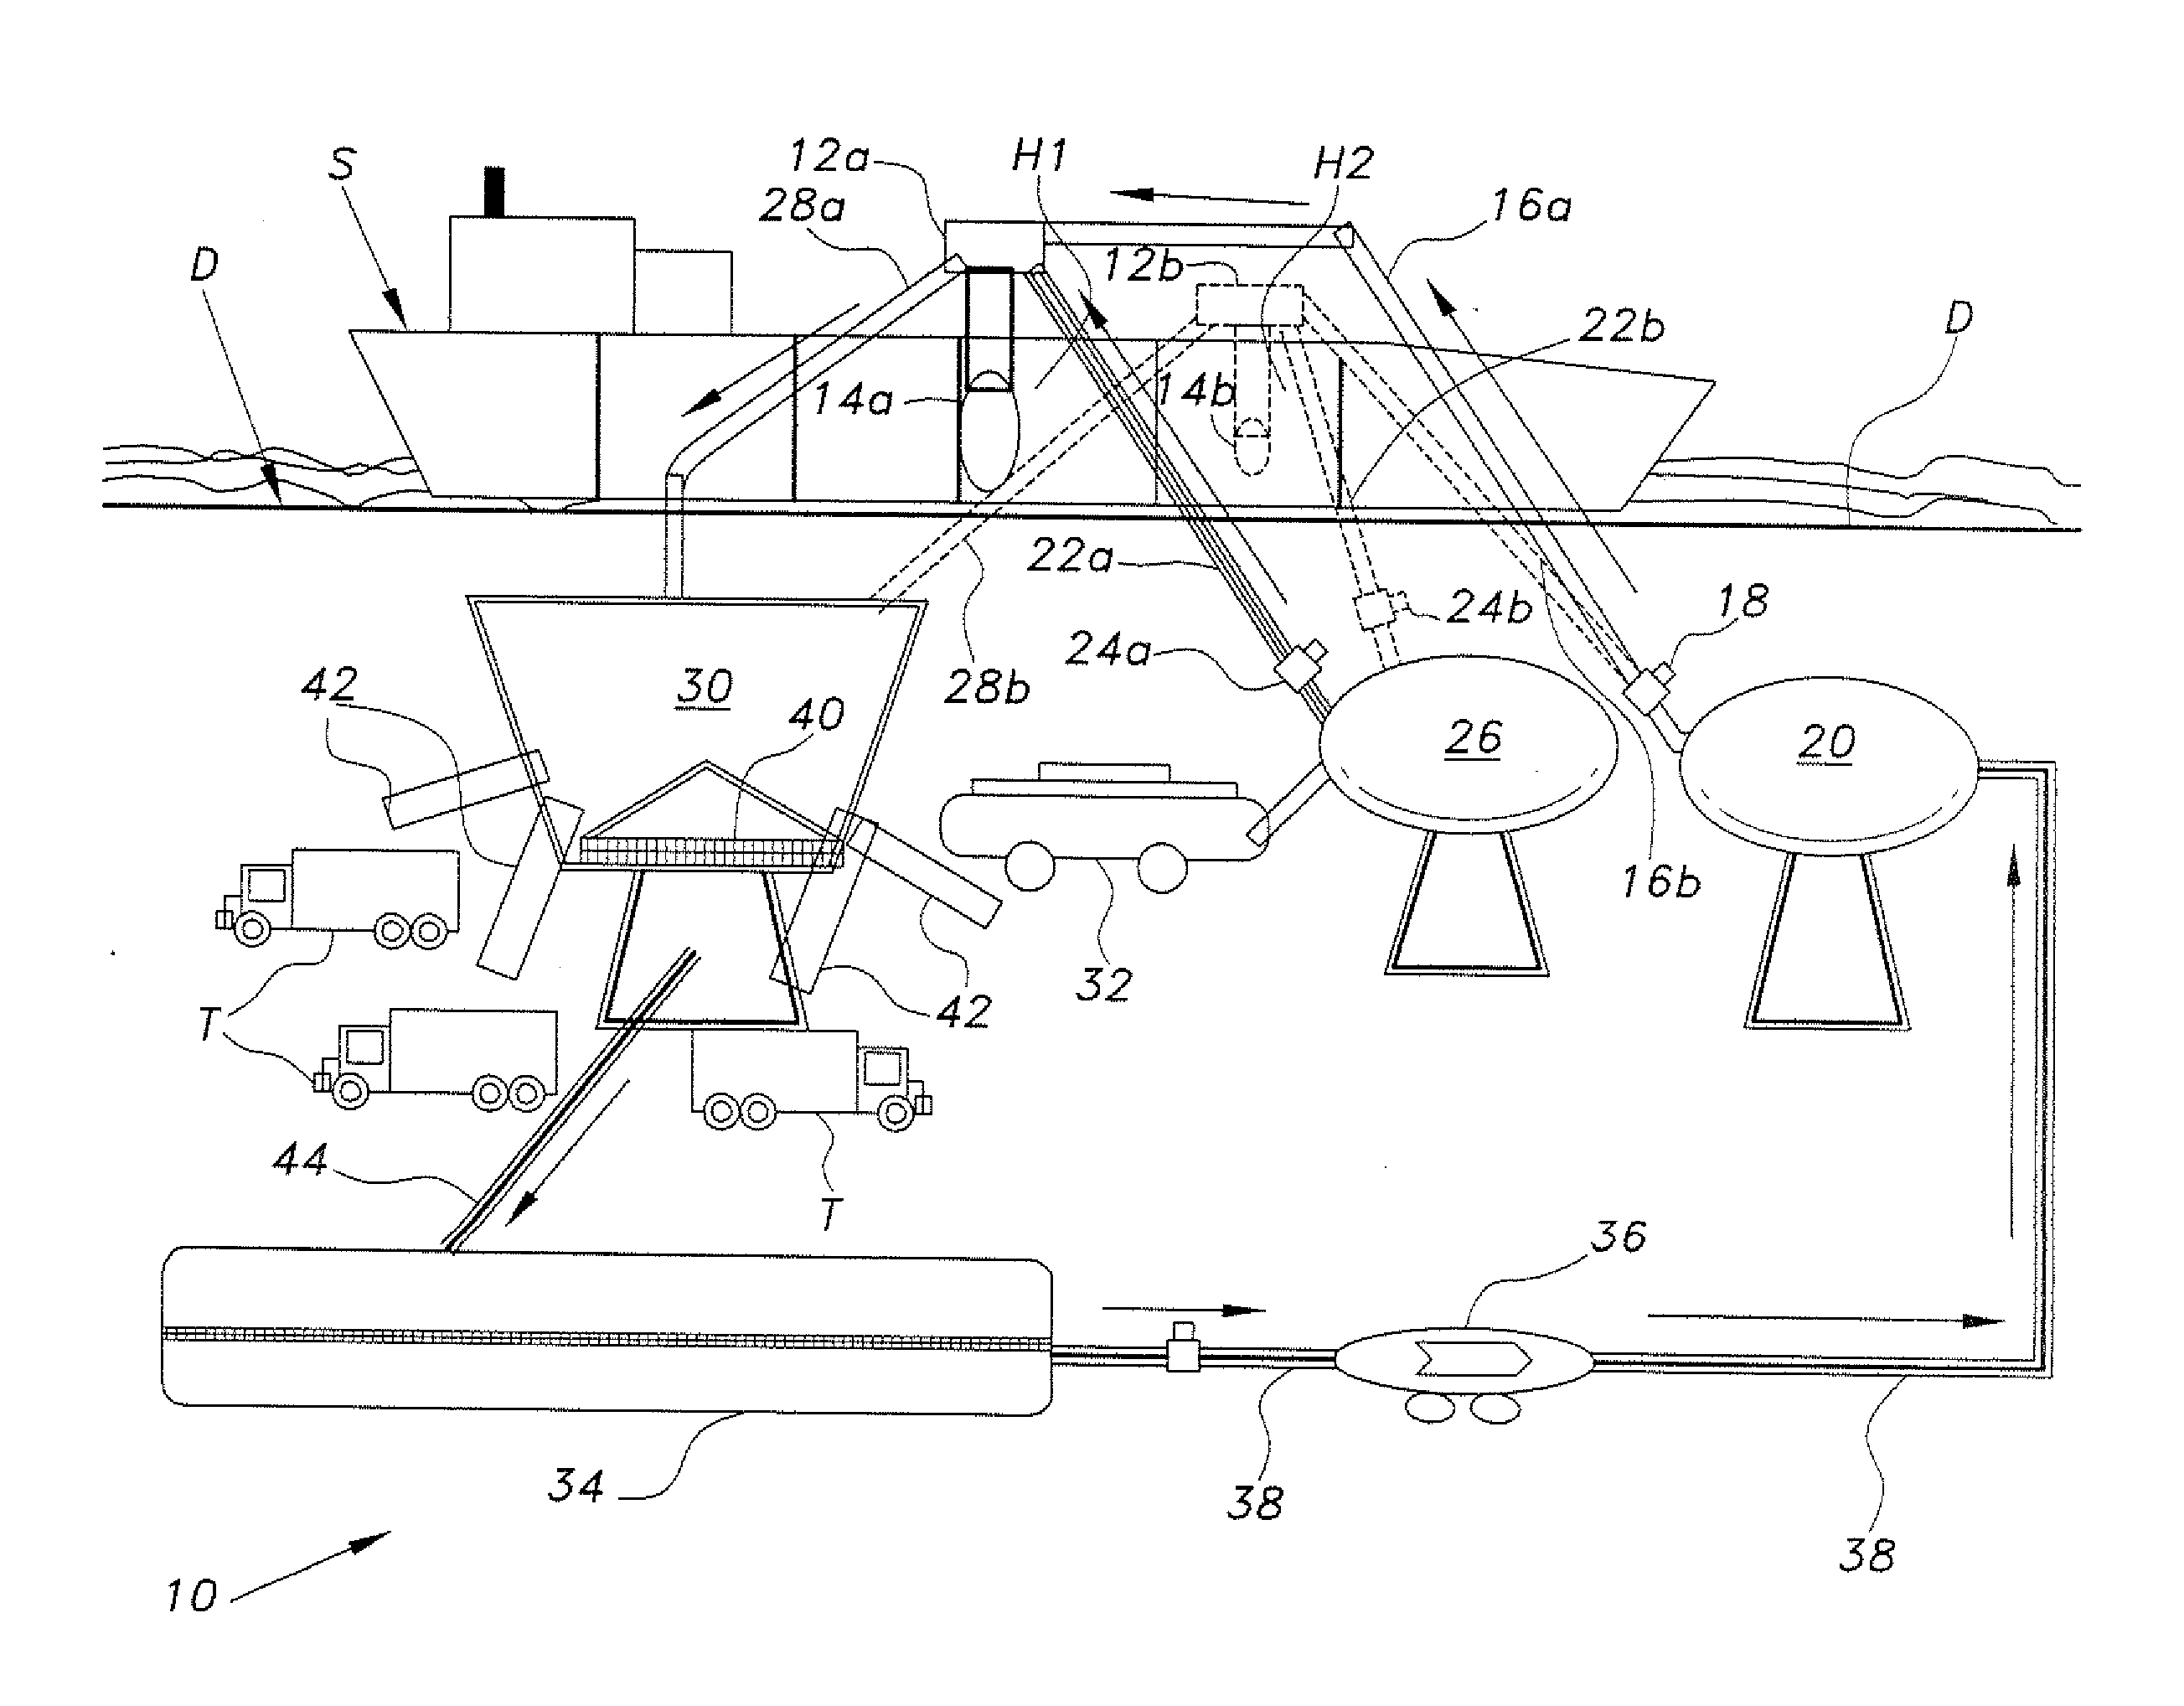 Aggregate processing system